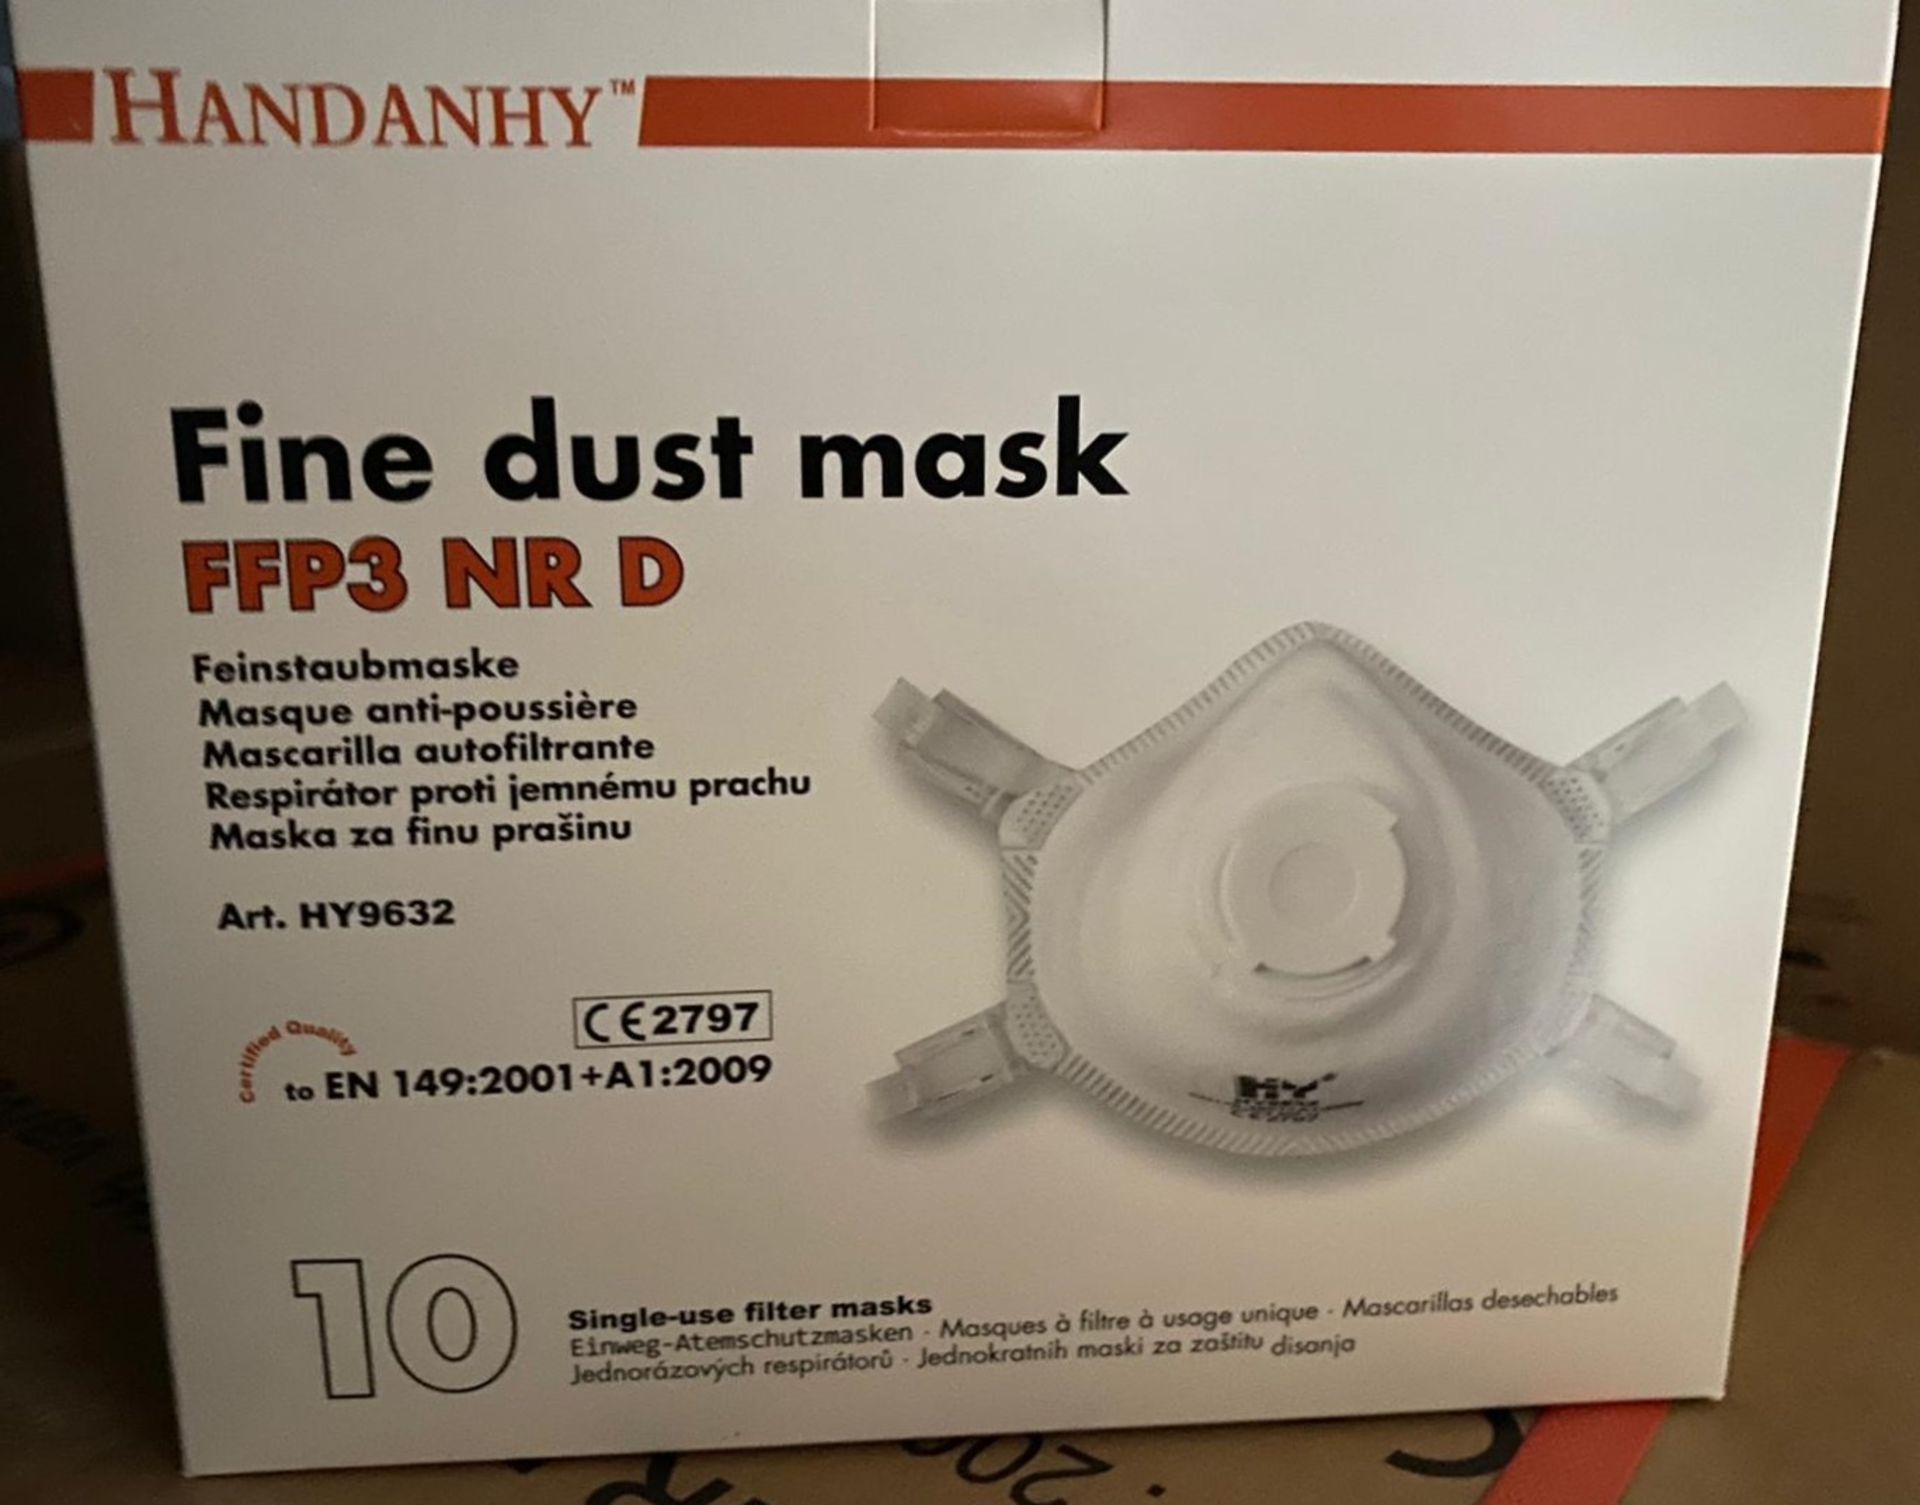 200 x Handanhy Fold Flat Disposable Face Masks With Exhalation Valves - Type HY8232 FFP3 - PPE - Image 4 of 5